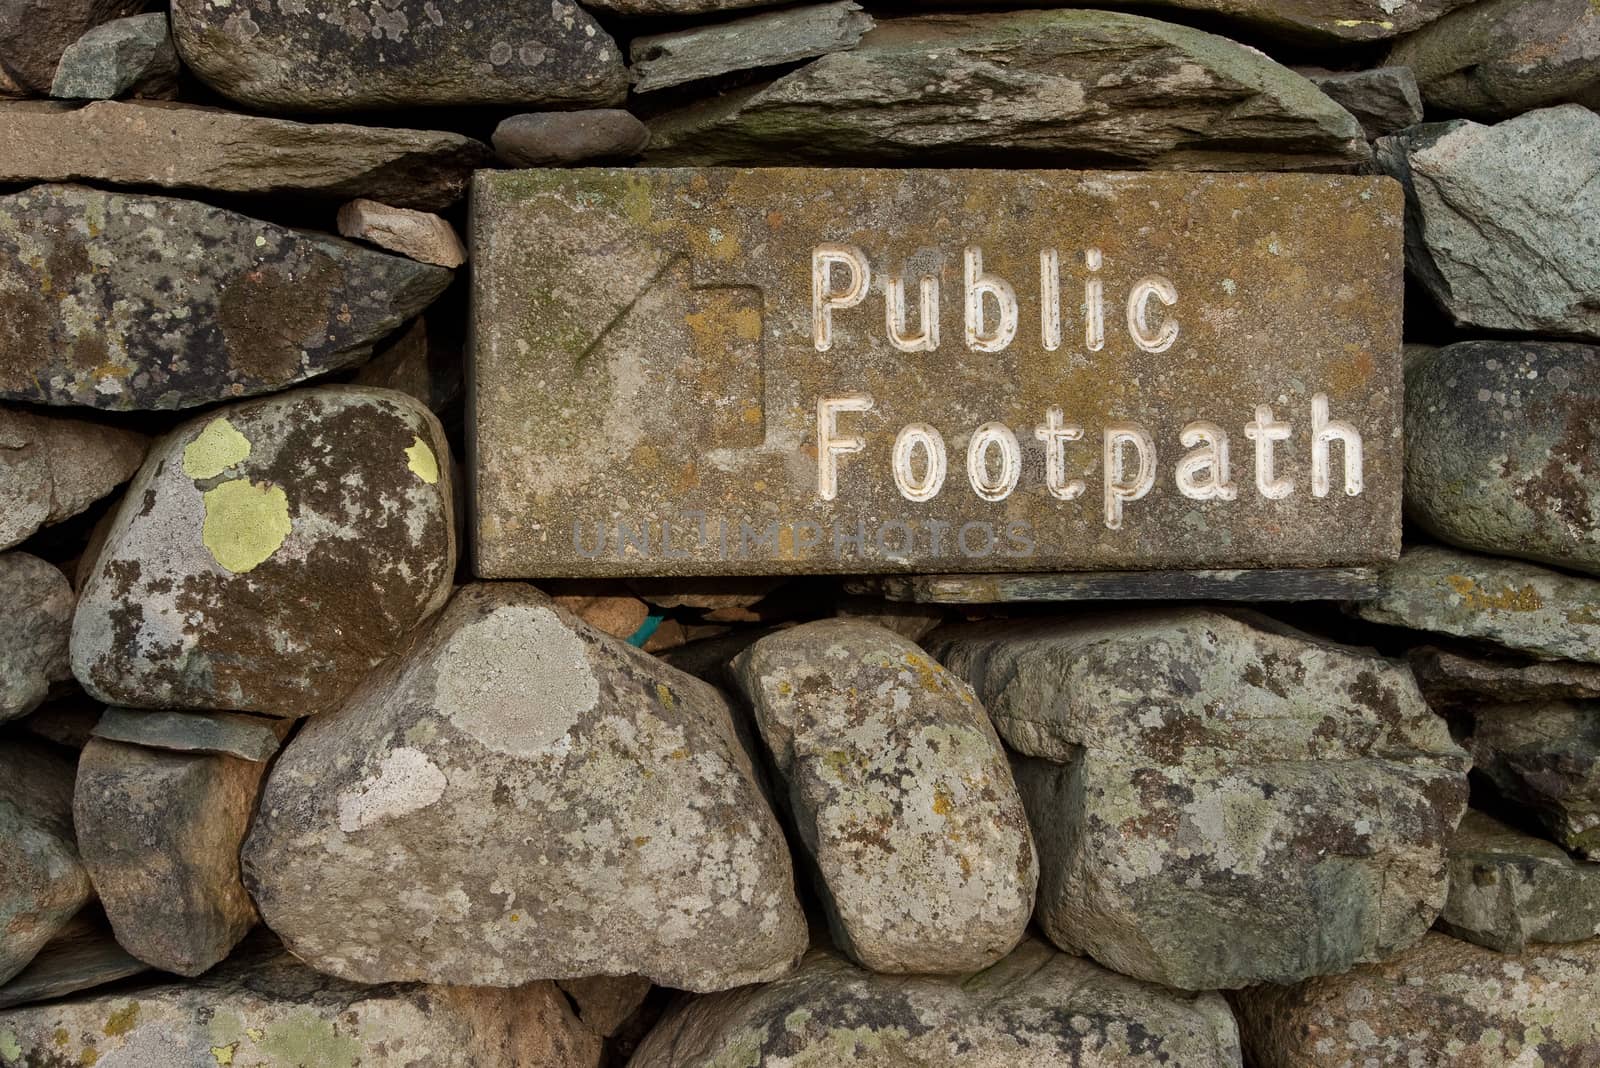 The stone public footpath sign is embedded in a dry stone wall and is situated alongside Ullswater lake in the English Lake District national park.